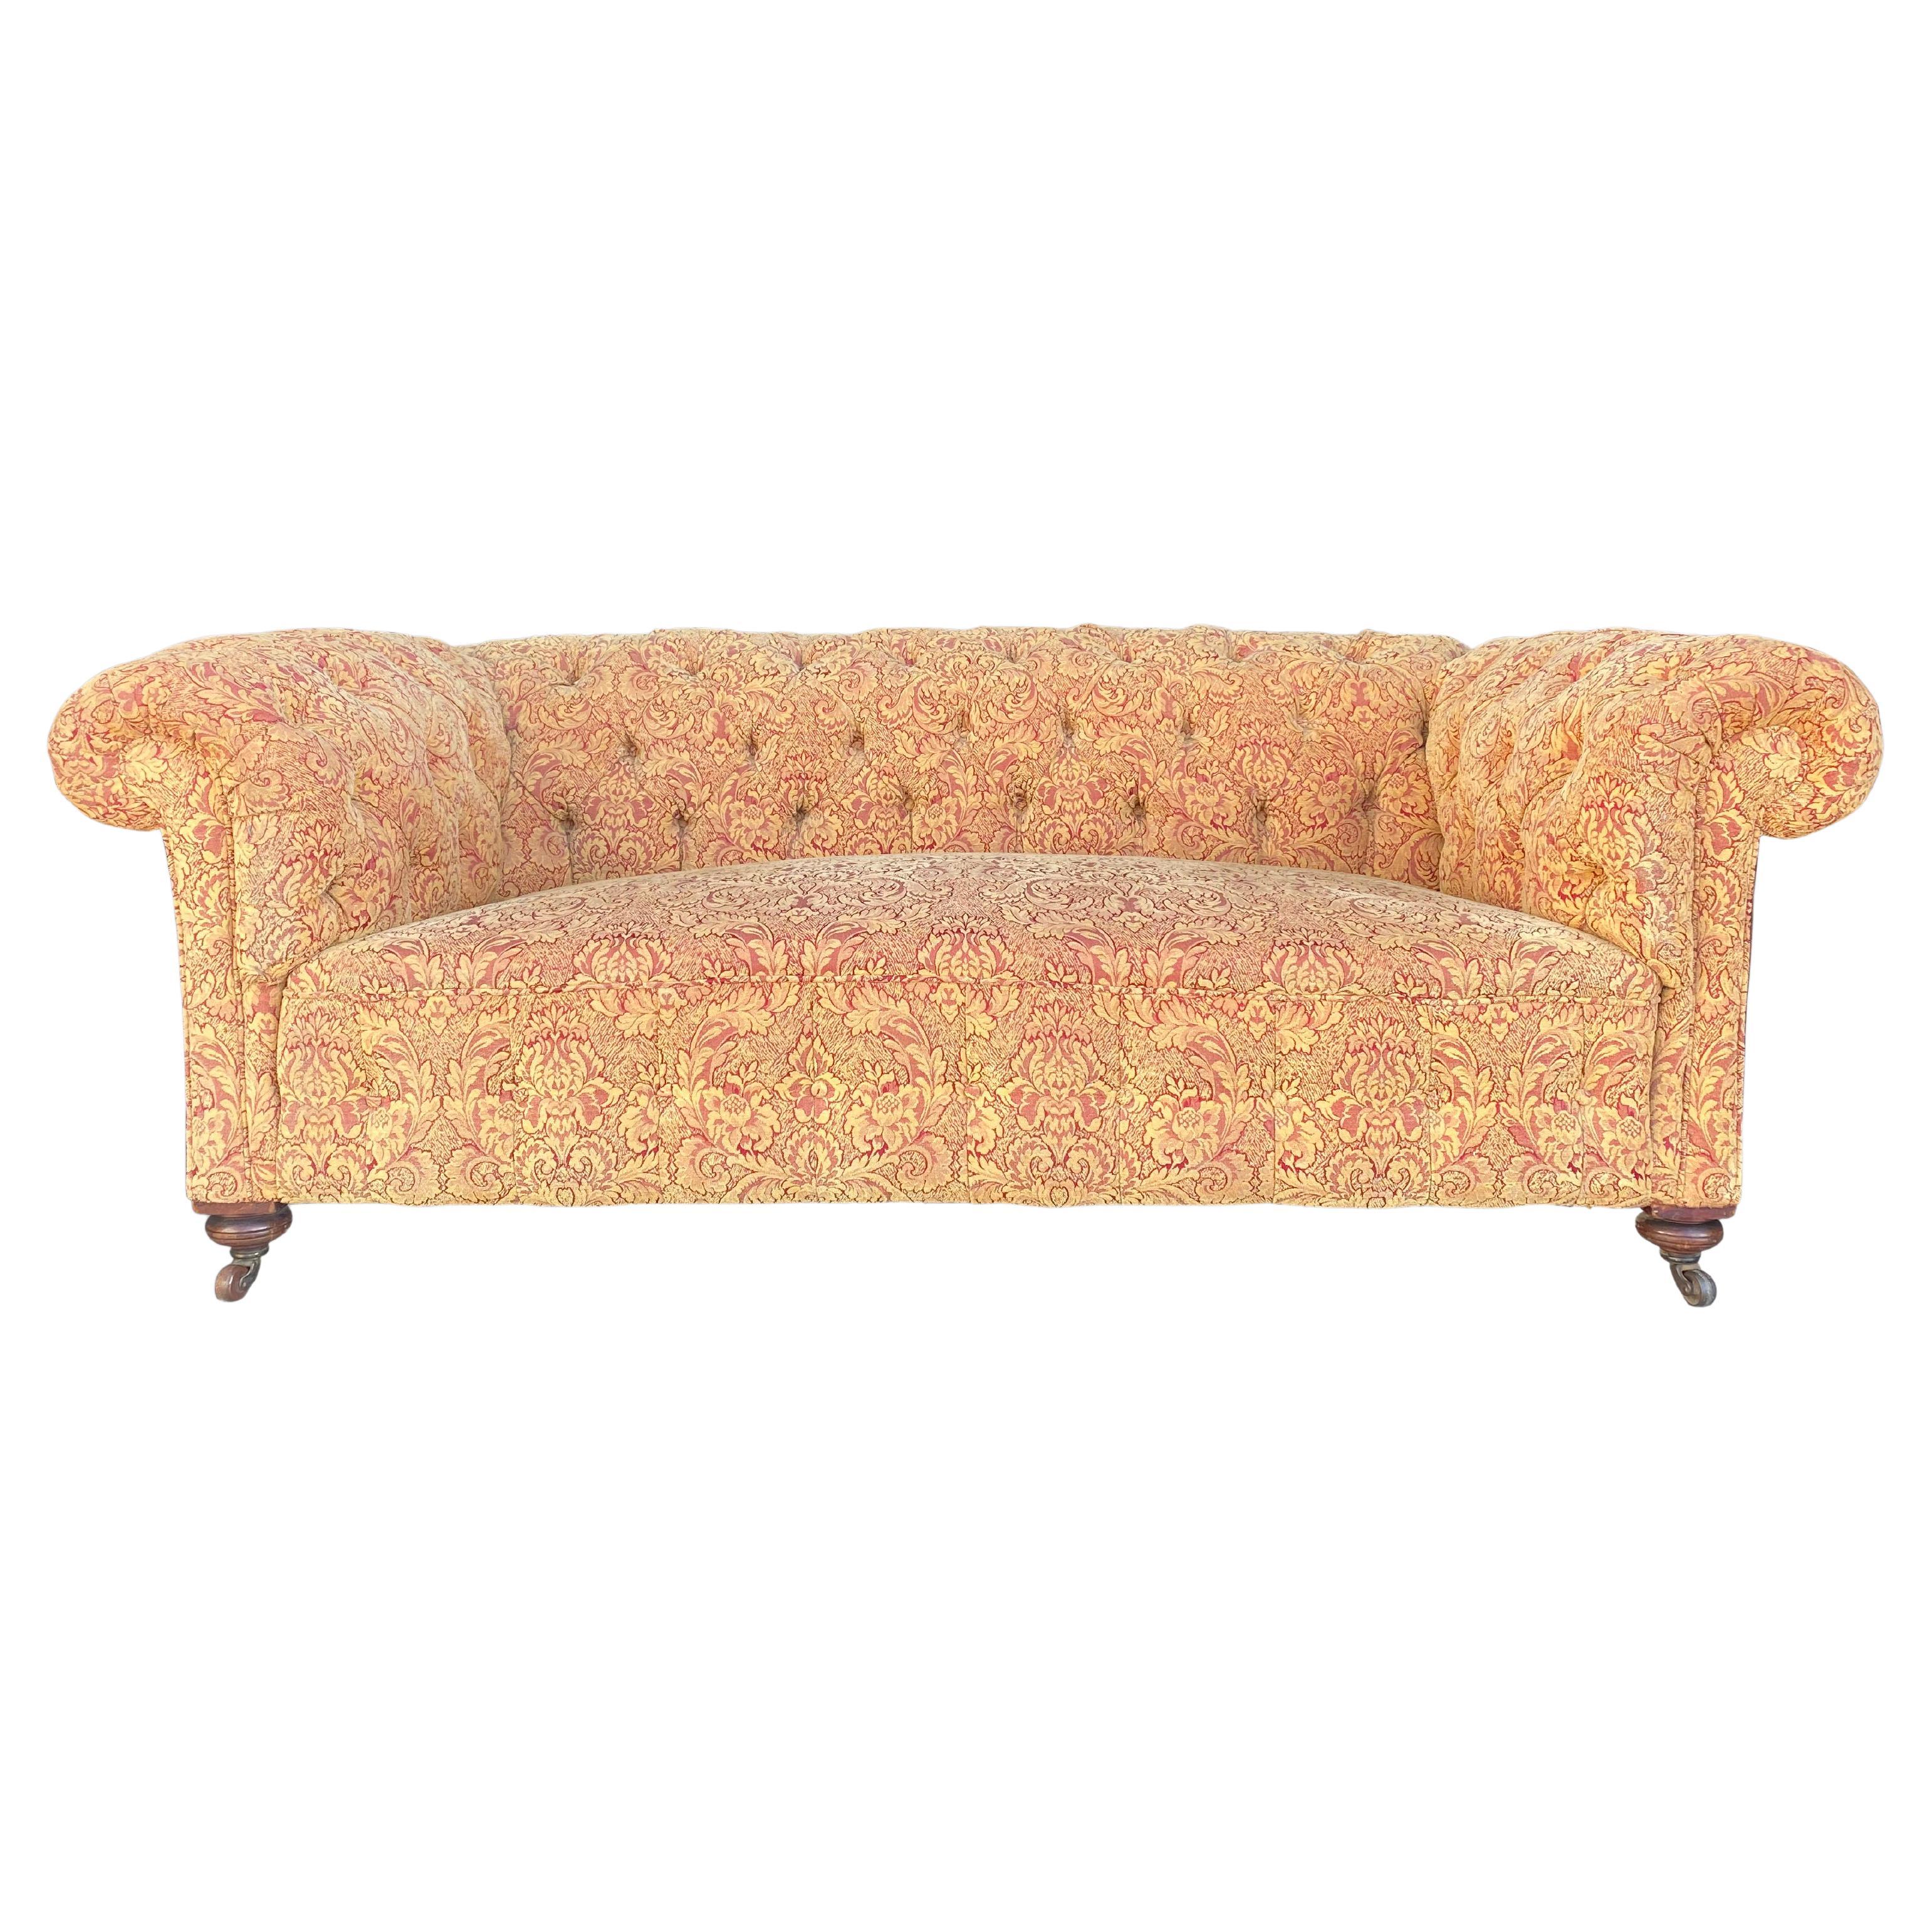 19th Century Victorian Period Upholstered Chesterfield Sofa For Sale at  1stDibs